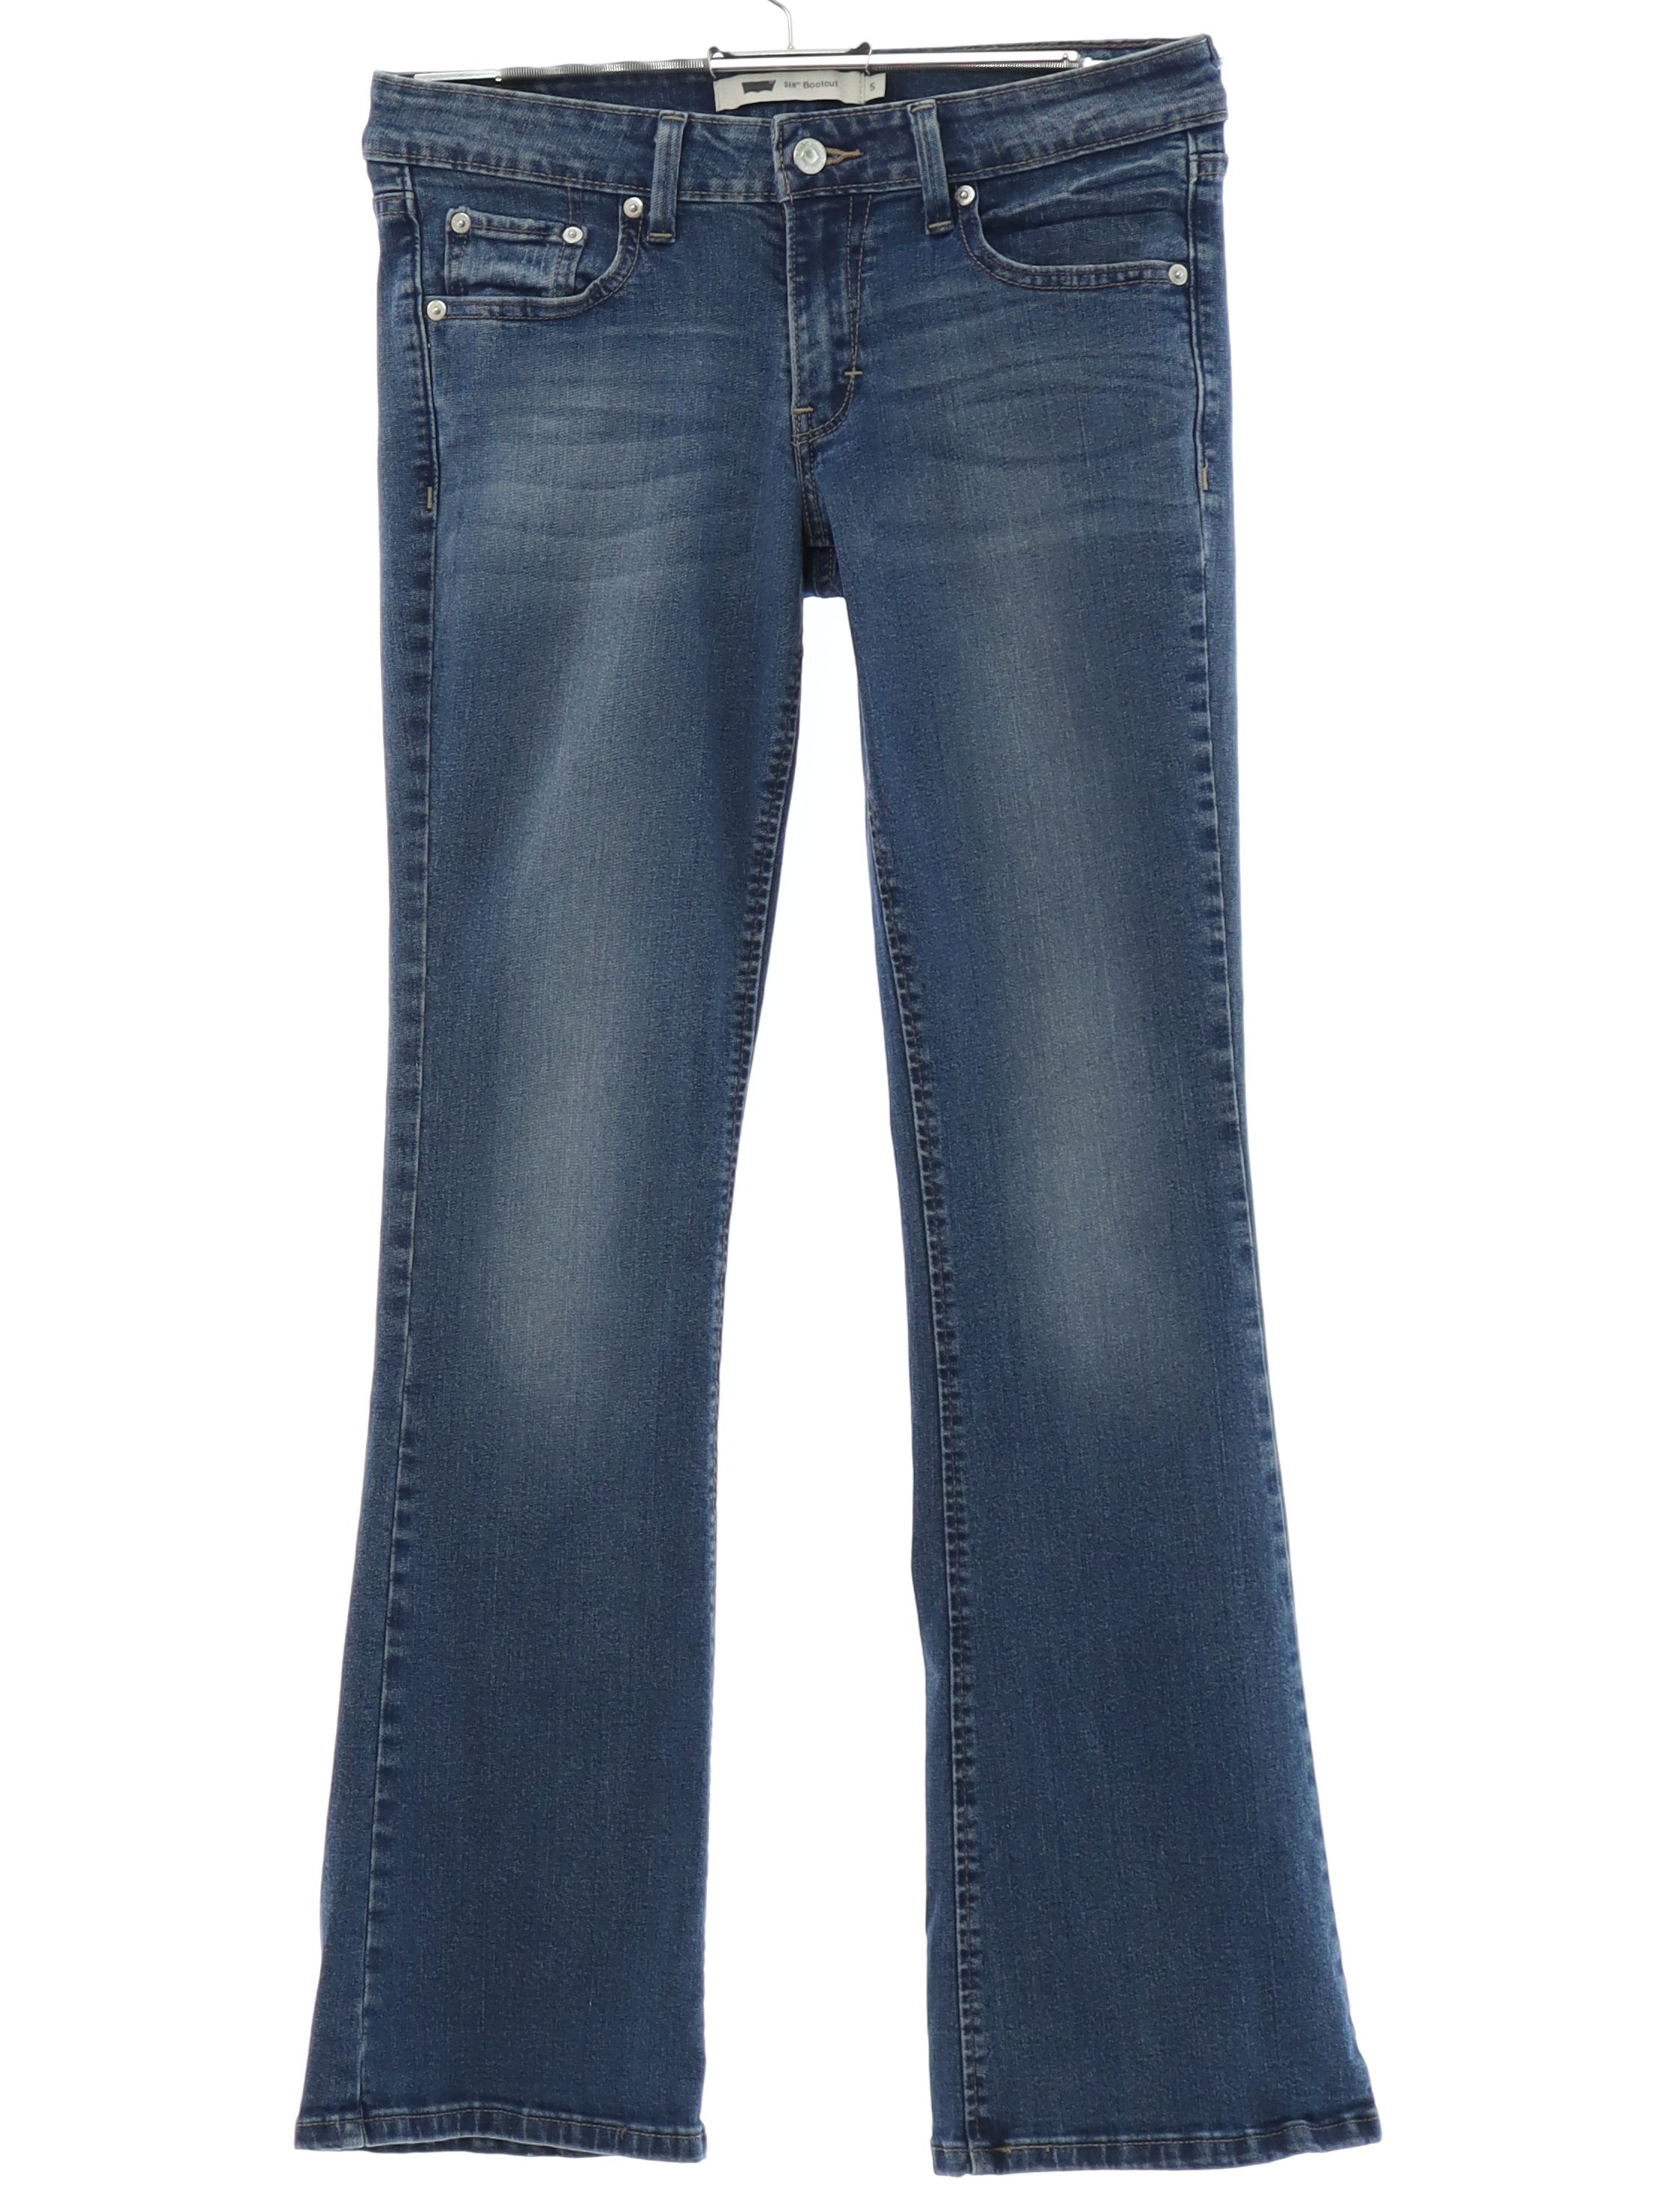 Flared / Flares: 90s -Levis 518- Womens blue stretchy spandex levis 518 bootcut flared denim jeans pants with zipper fly closure with button. Five pocket style - scoop pockets